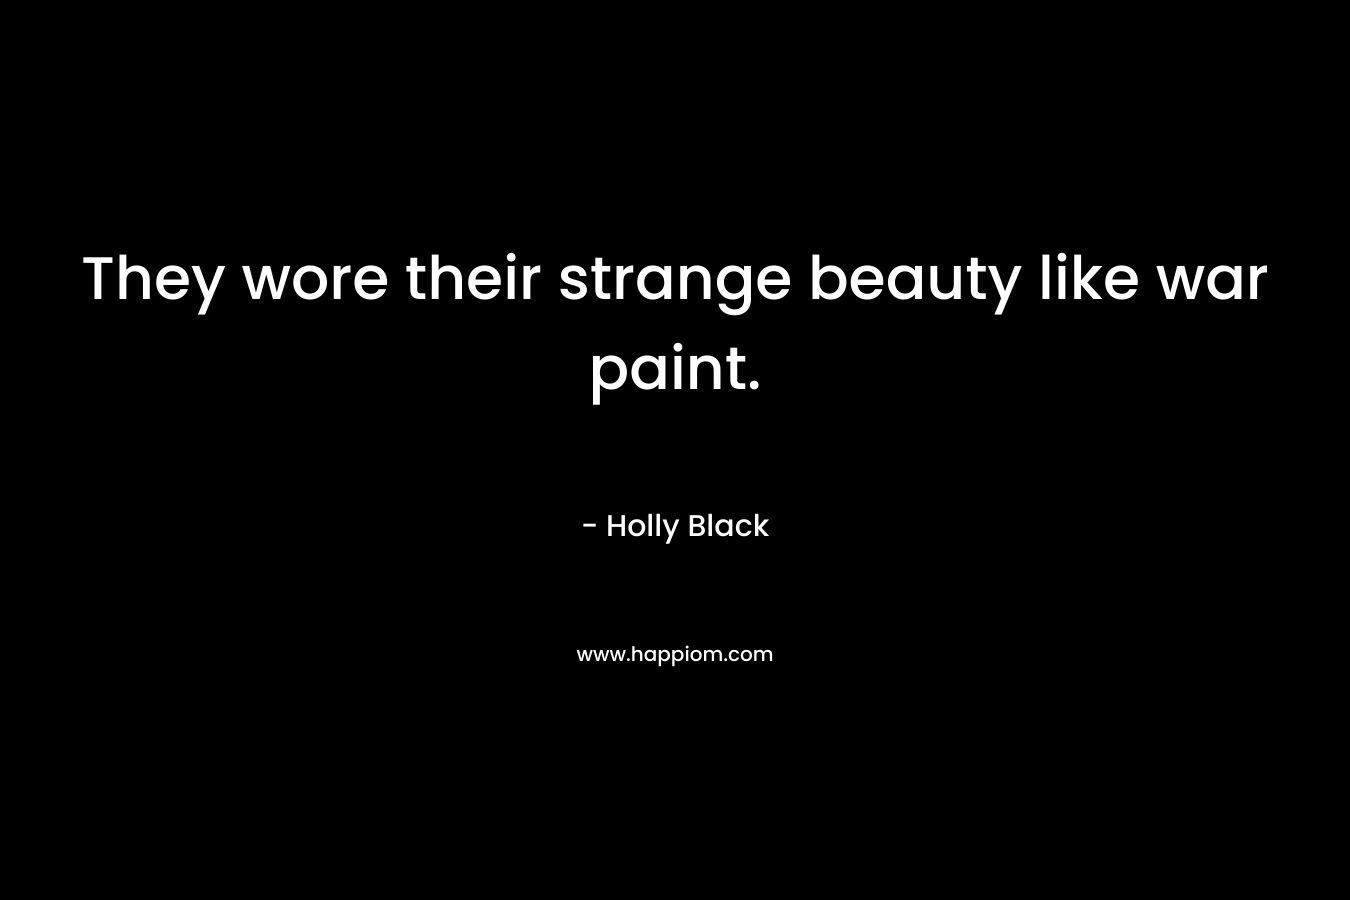 They wore their strange beauty like war paint. – Holly Black